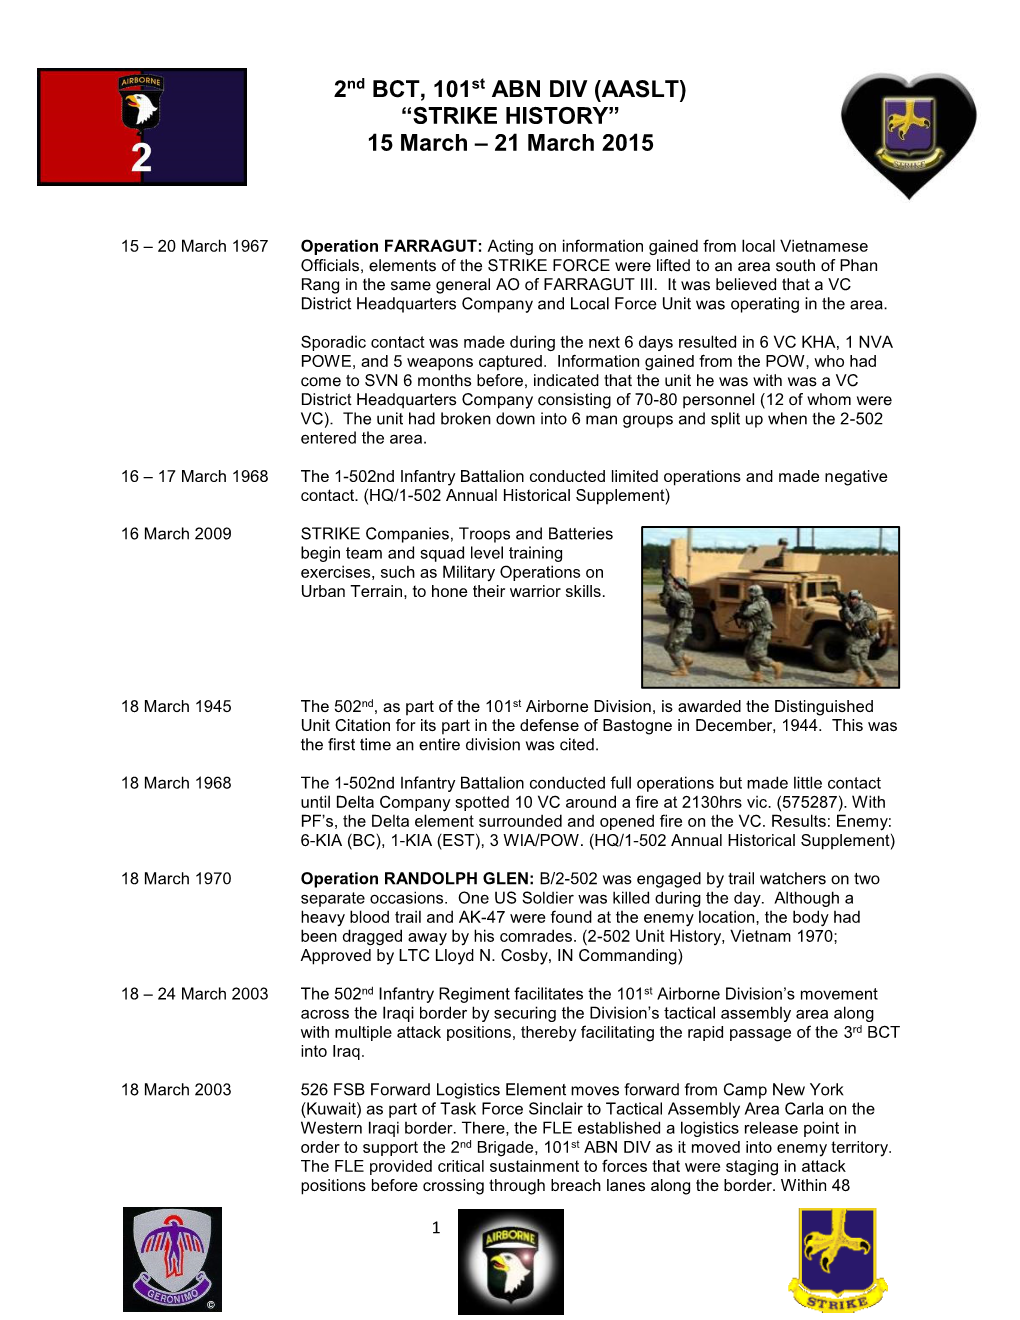 2Nd BCT, 101St ABN DIV (AASLT) “STRIKE HISTORY” 15 March – 21 March 2015